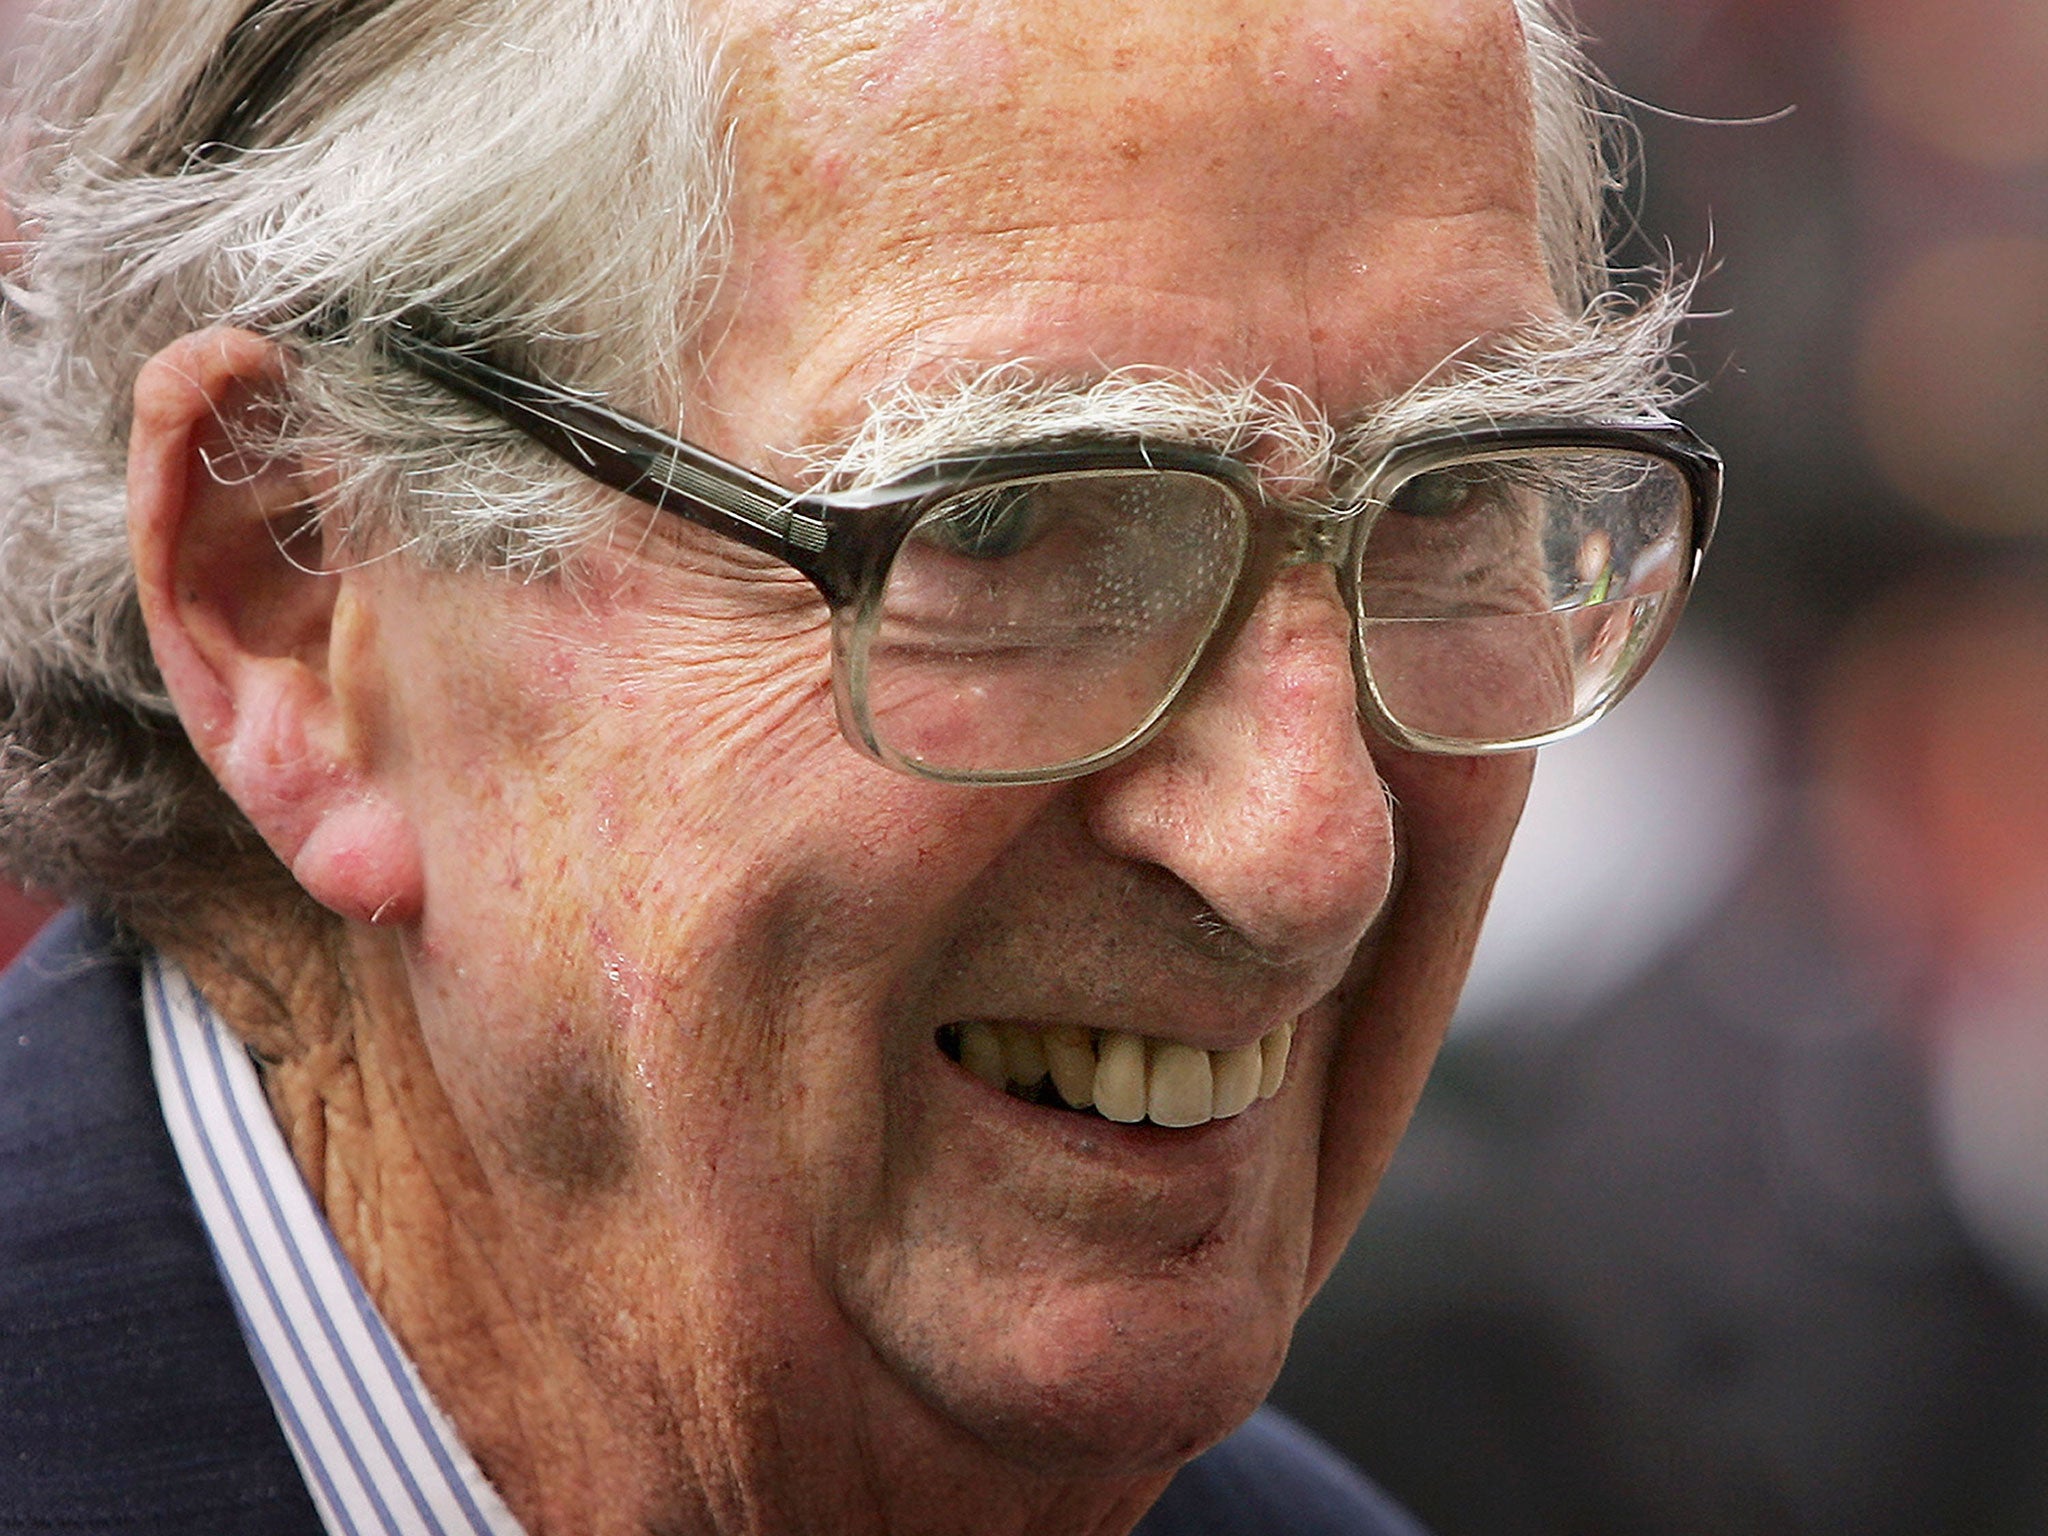 Lord Healey was known for his humour and sharp wit